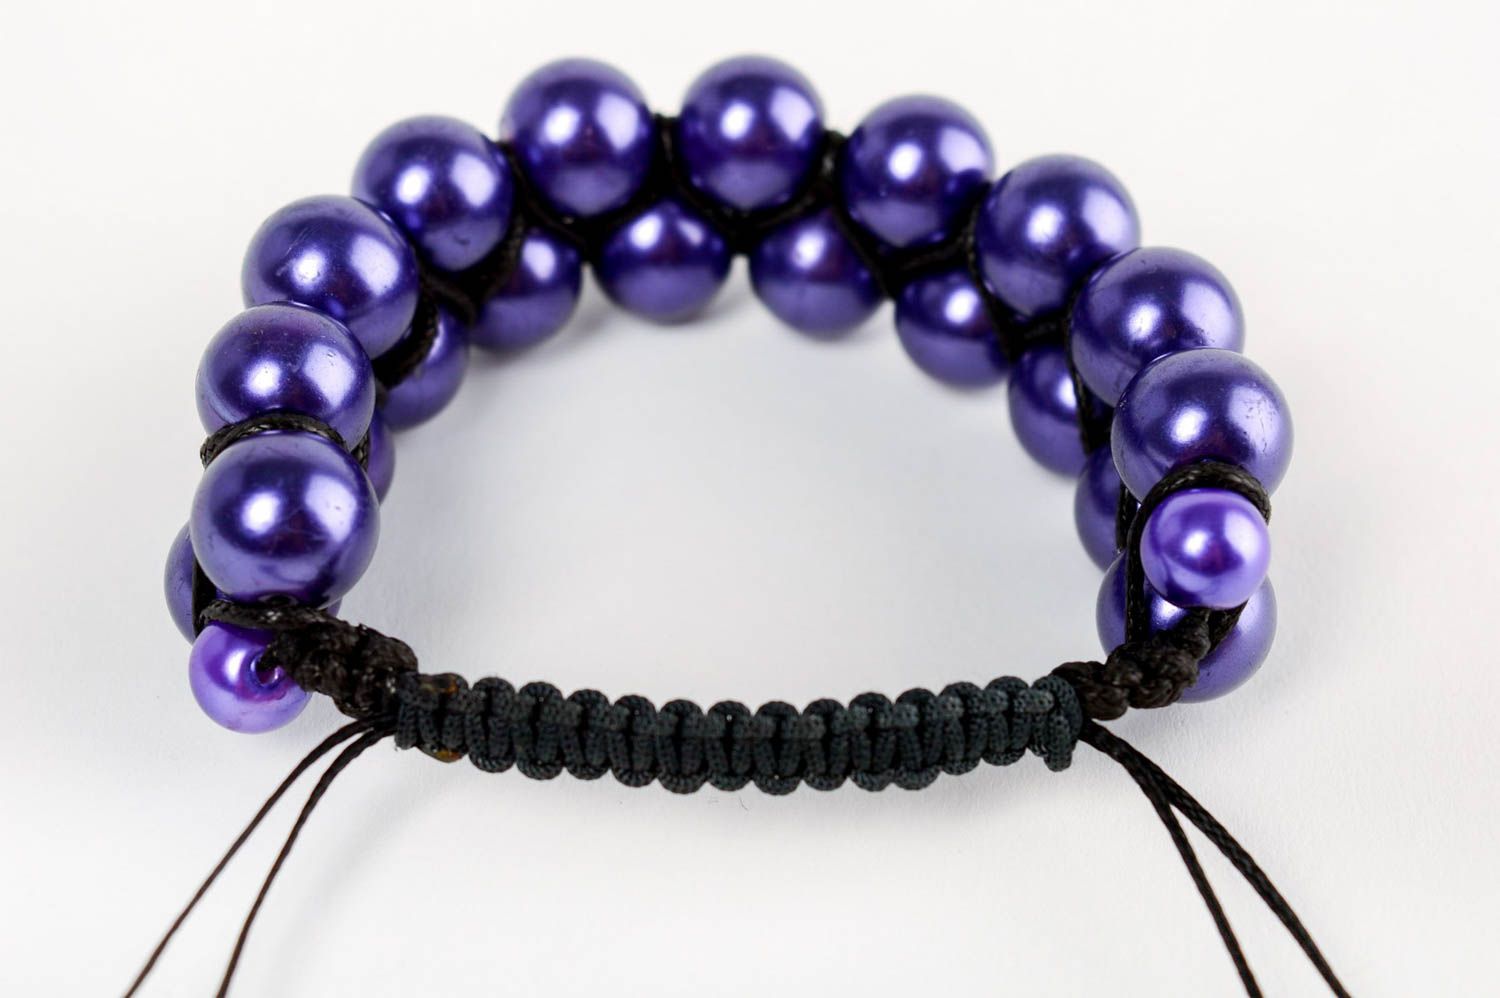 Handmade purple bracelet made of ceramic pearls and lace using macrame technique photo 3